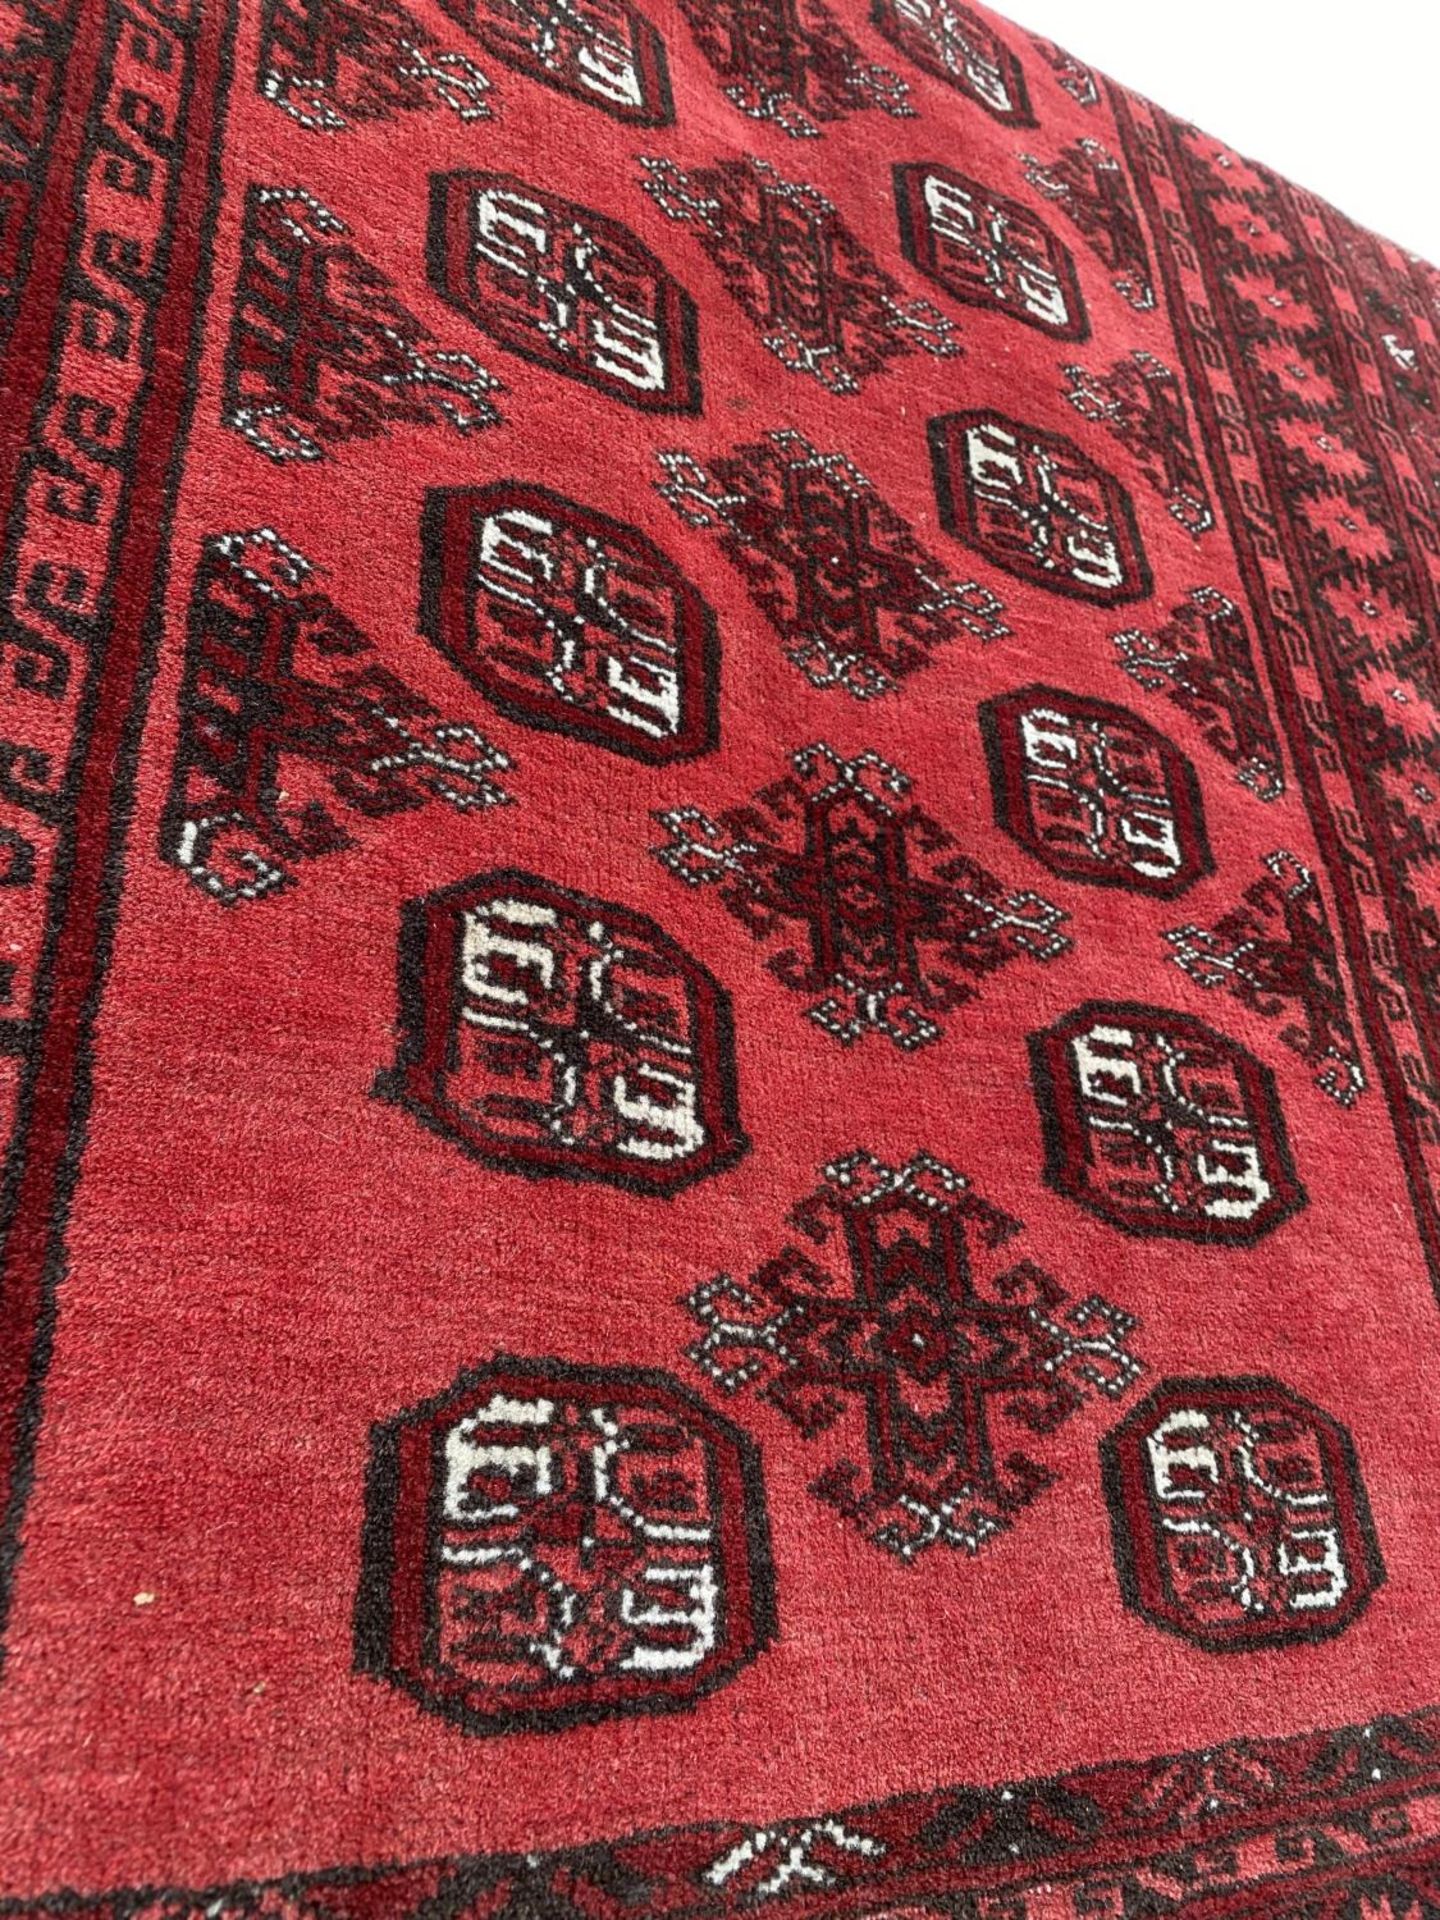 A RED PATTERNED FRINGED RUG (185CM x 107CM) - Image 2 of 3